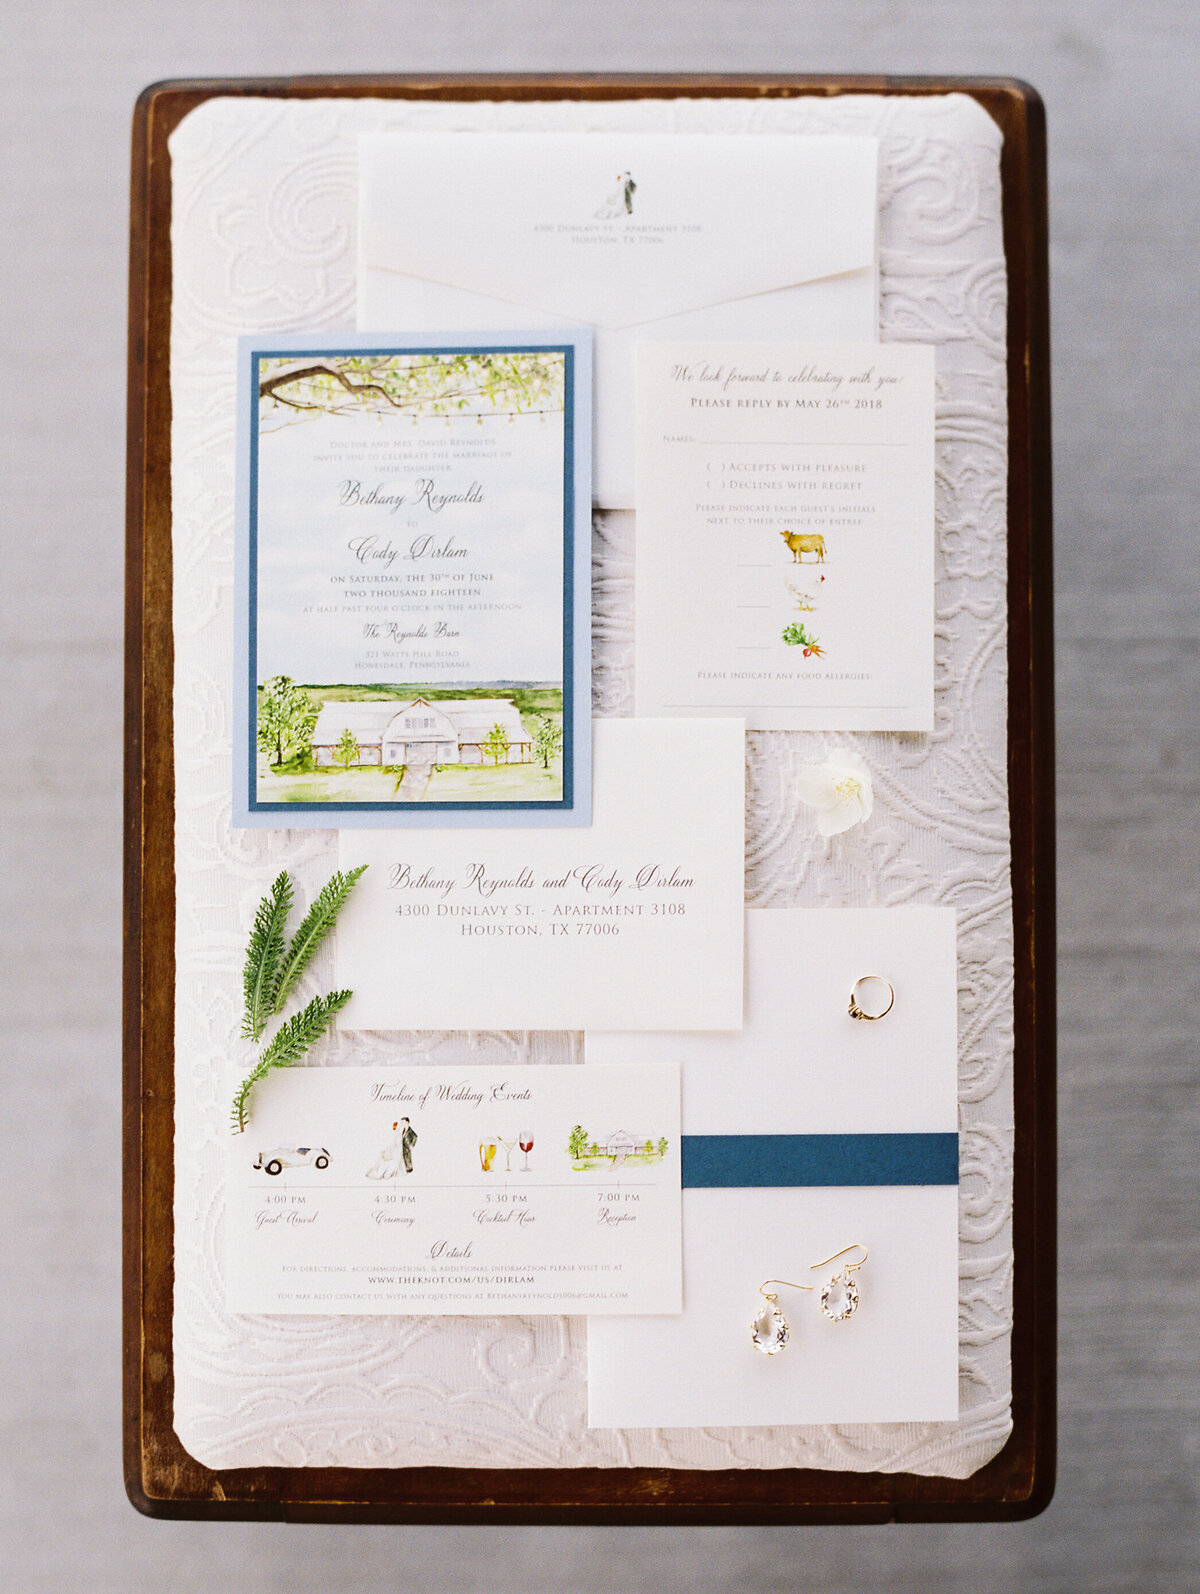 Detail photo of wedding stationery, rings, earrings and greenery